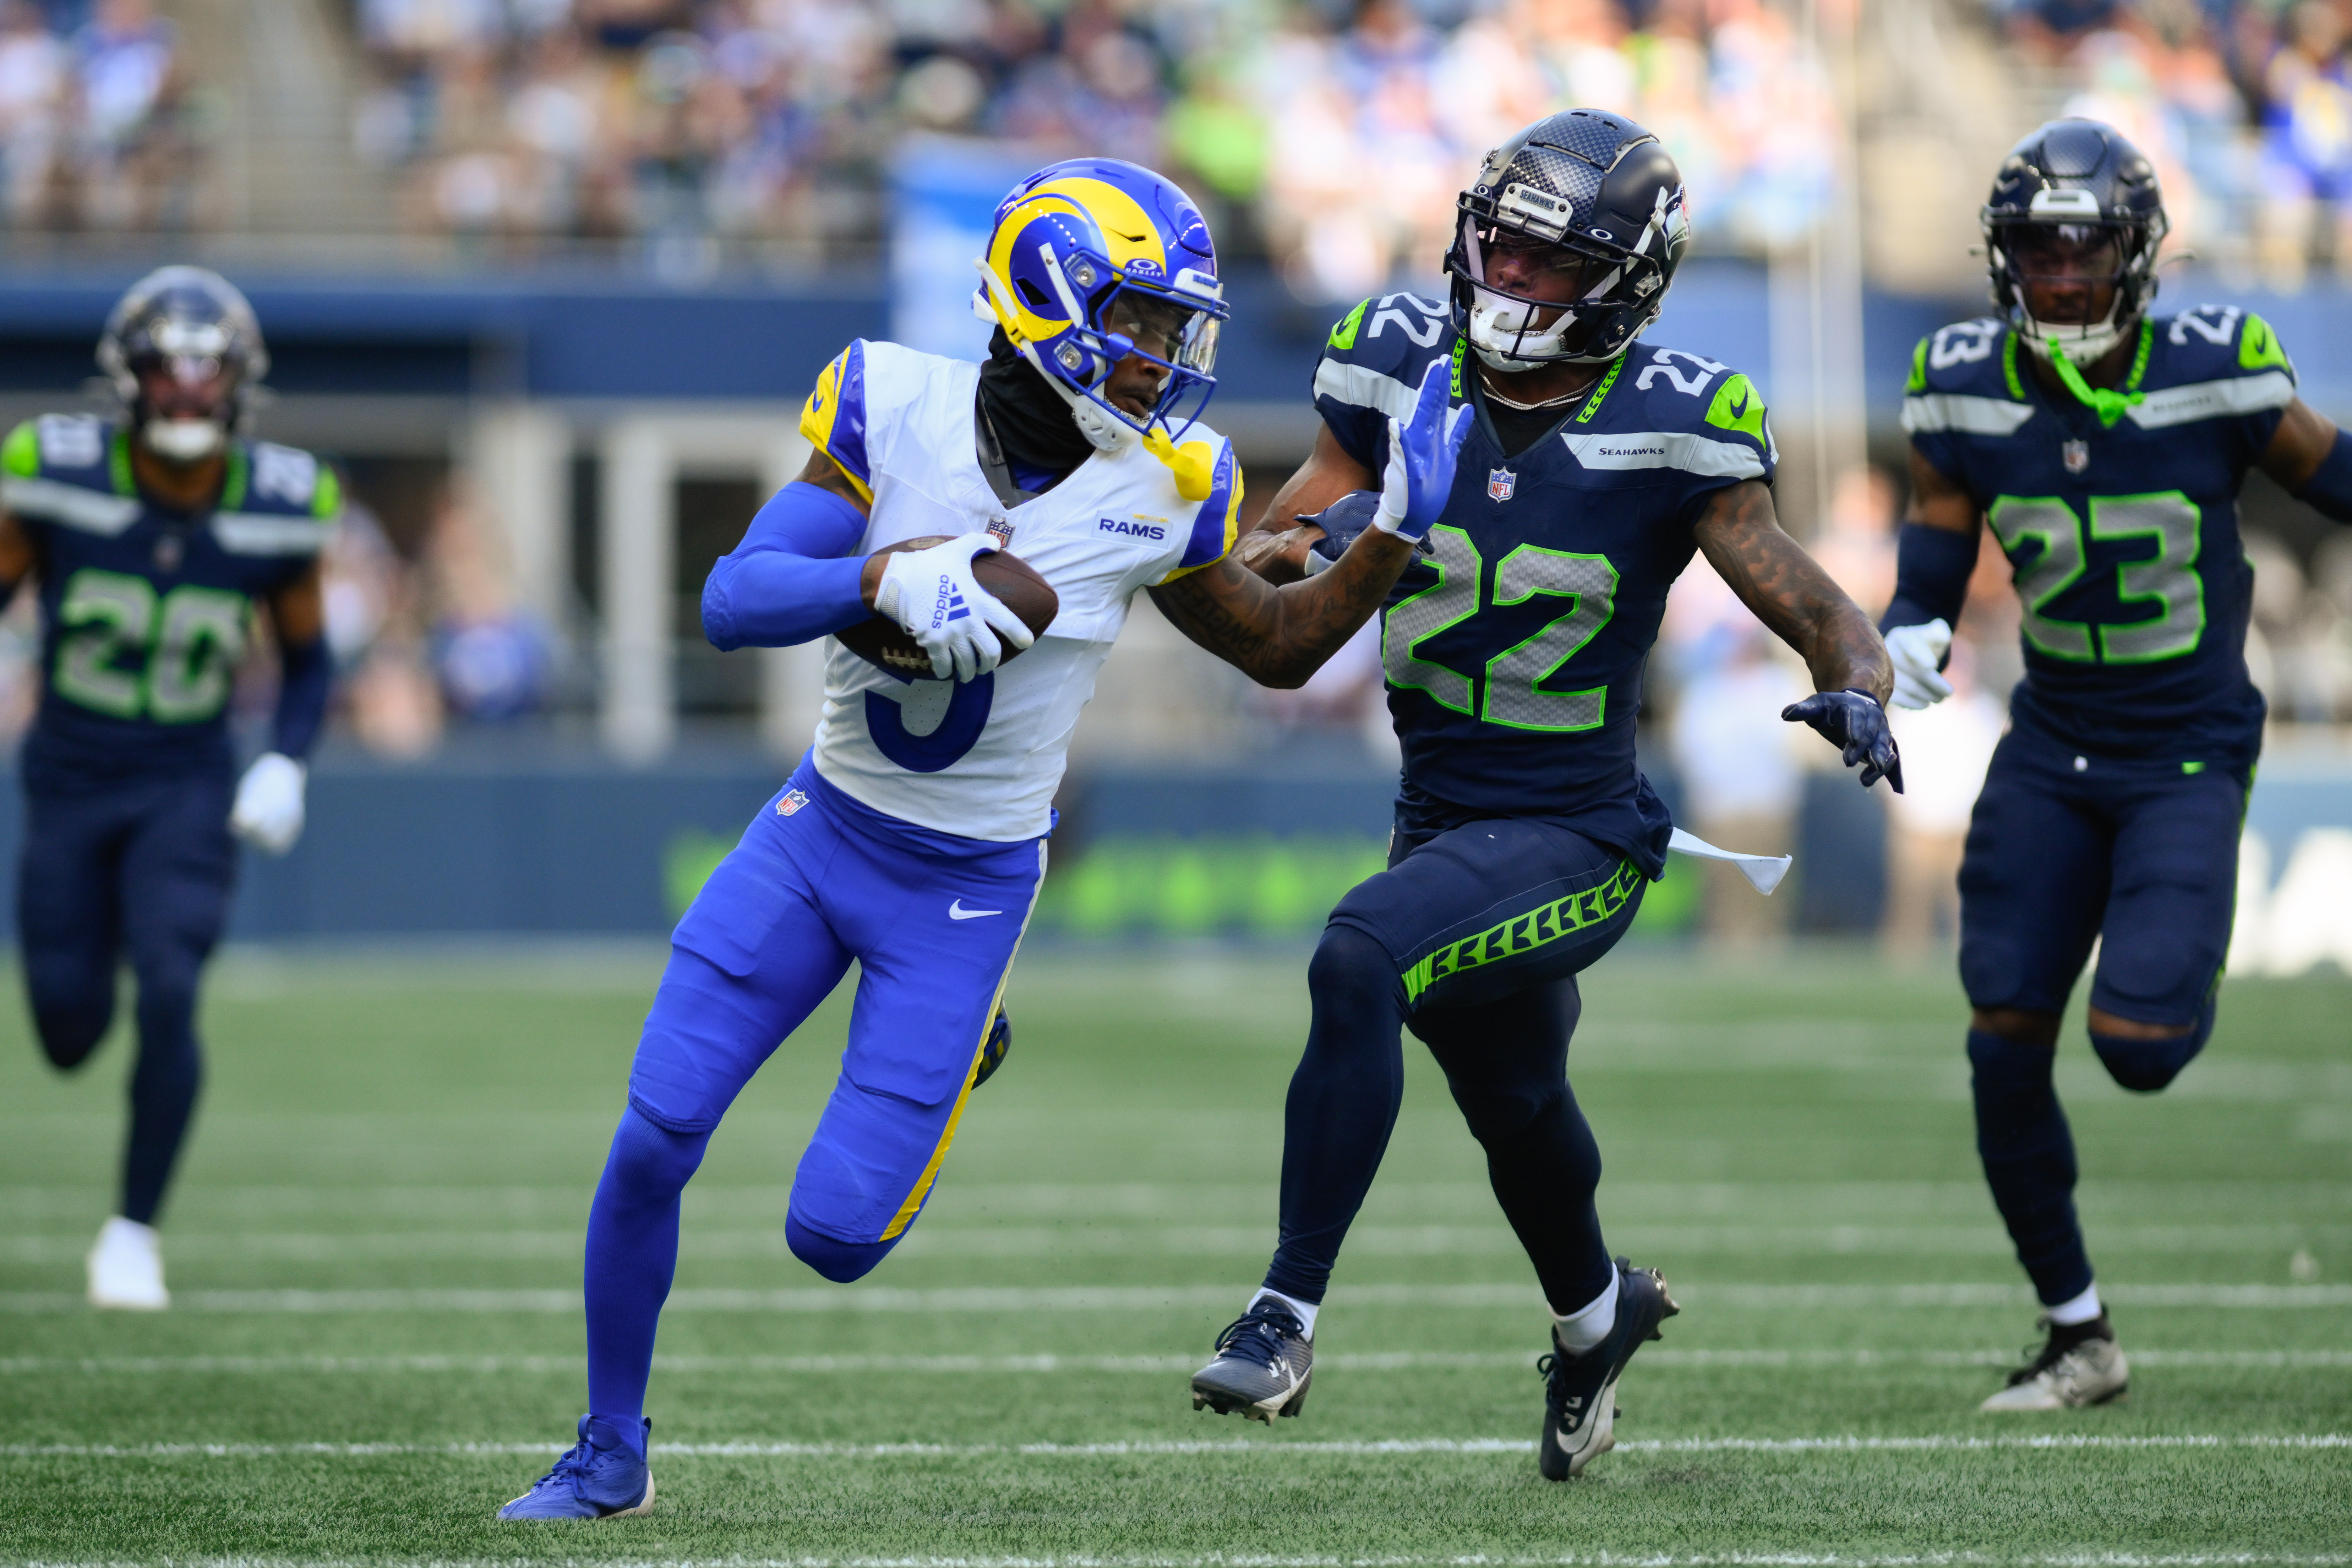 Cigar Thoughts, Game 1: Seahawks lay egg vs Rams. Egg hatches